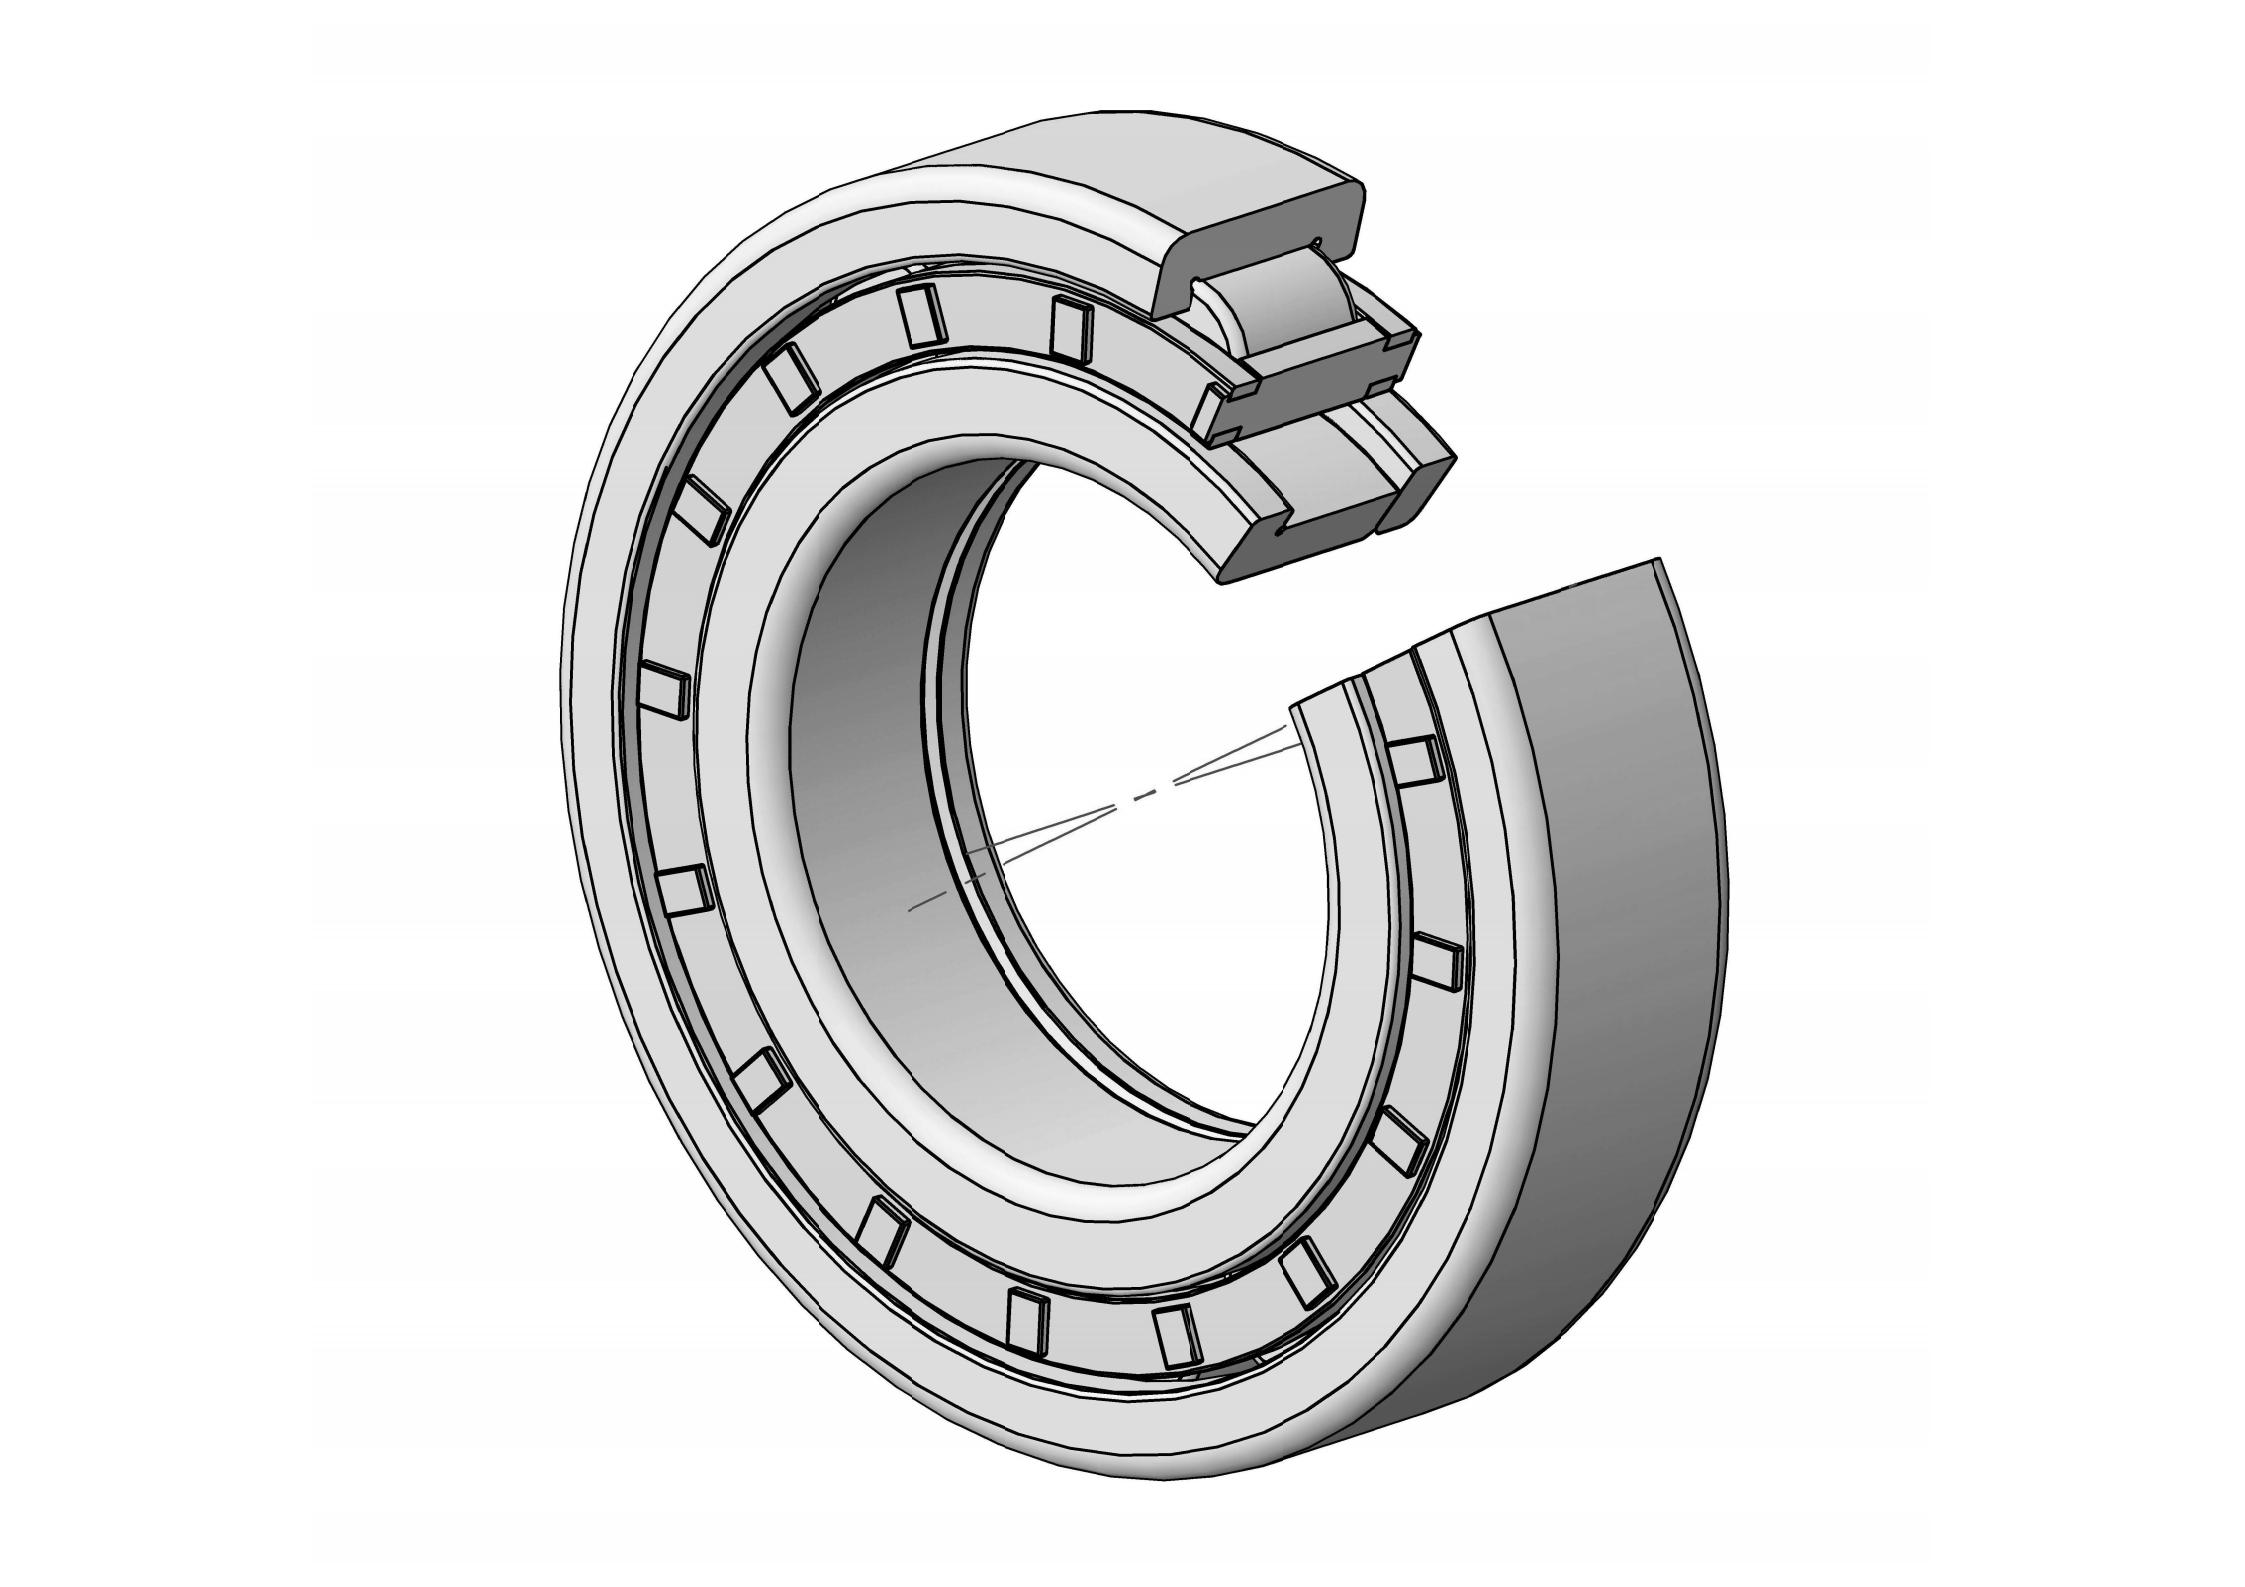 NUP2304-E Single Row Cylindrical roller bearing 